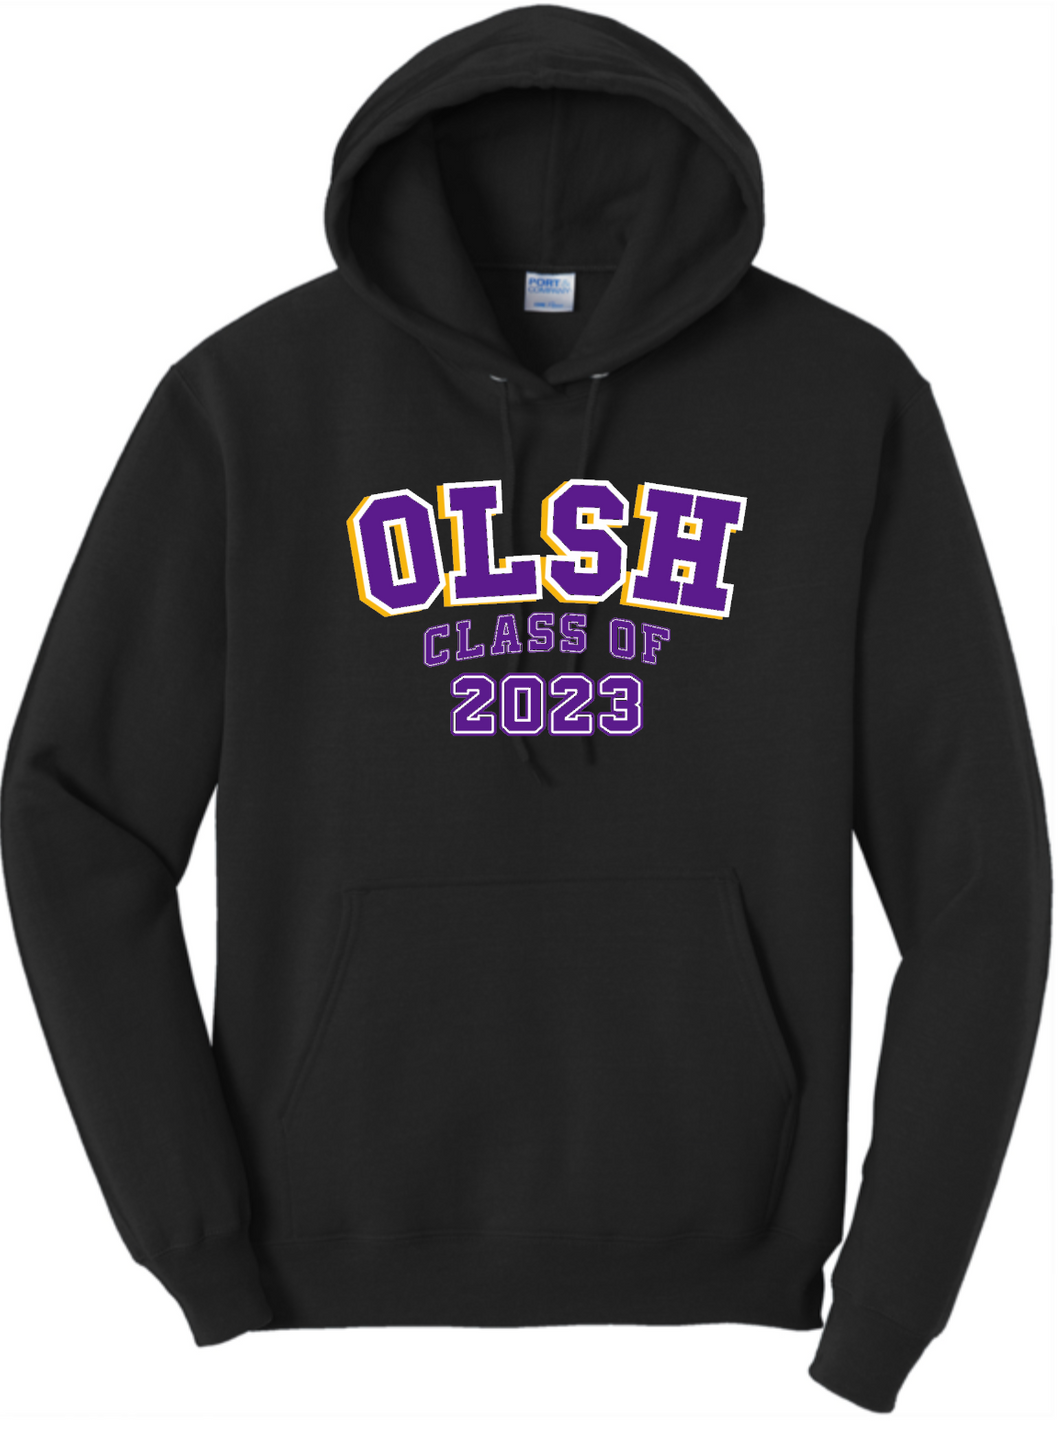 OLSH CLASS OF 2023 YOUTH & ADULT HOODED SWEATSHIRT - JET BLACK OR ATHLETIC HEATHER